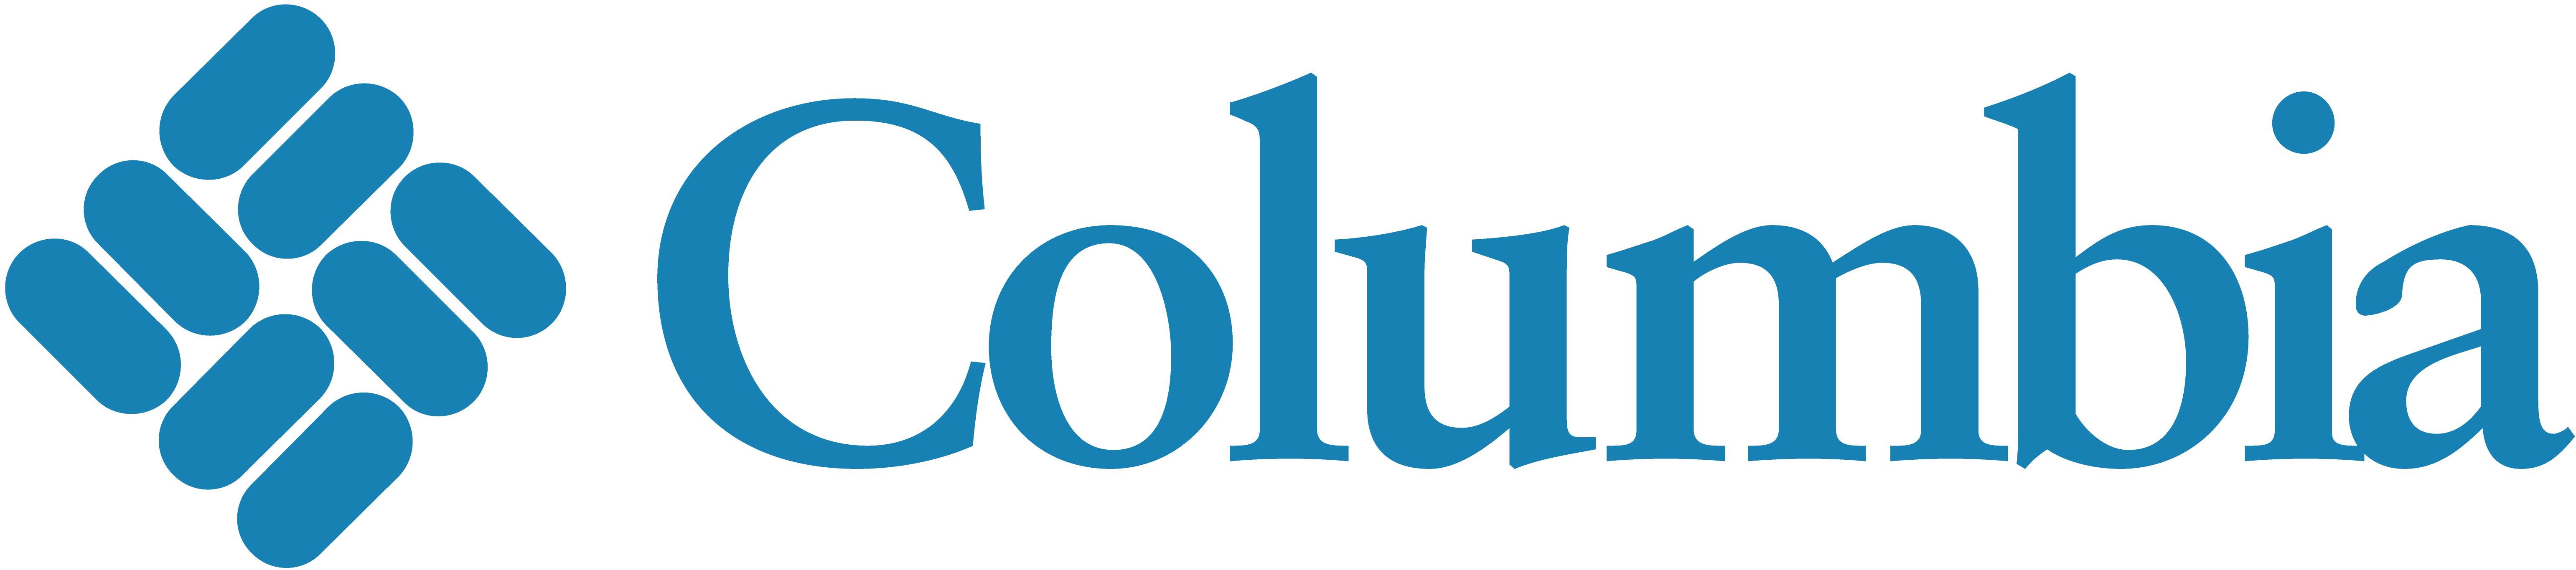 Columbia Apparel Logo - Columbia Sportswear Delivers High Impact, Targeted And Personalized